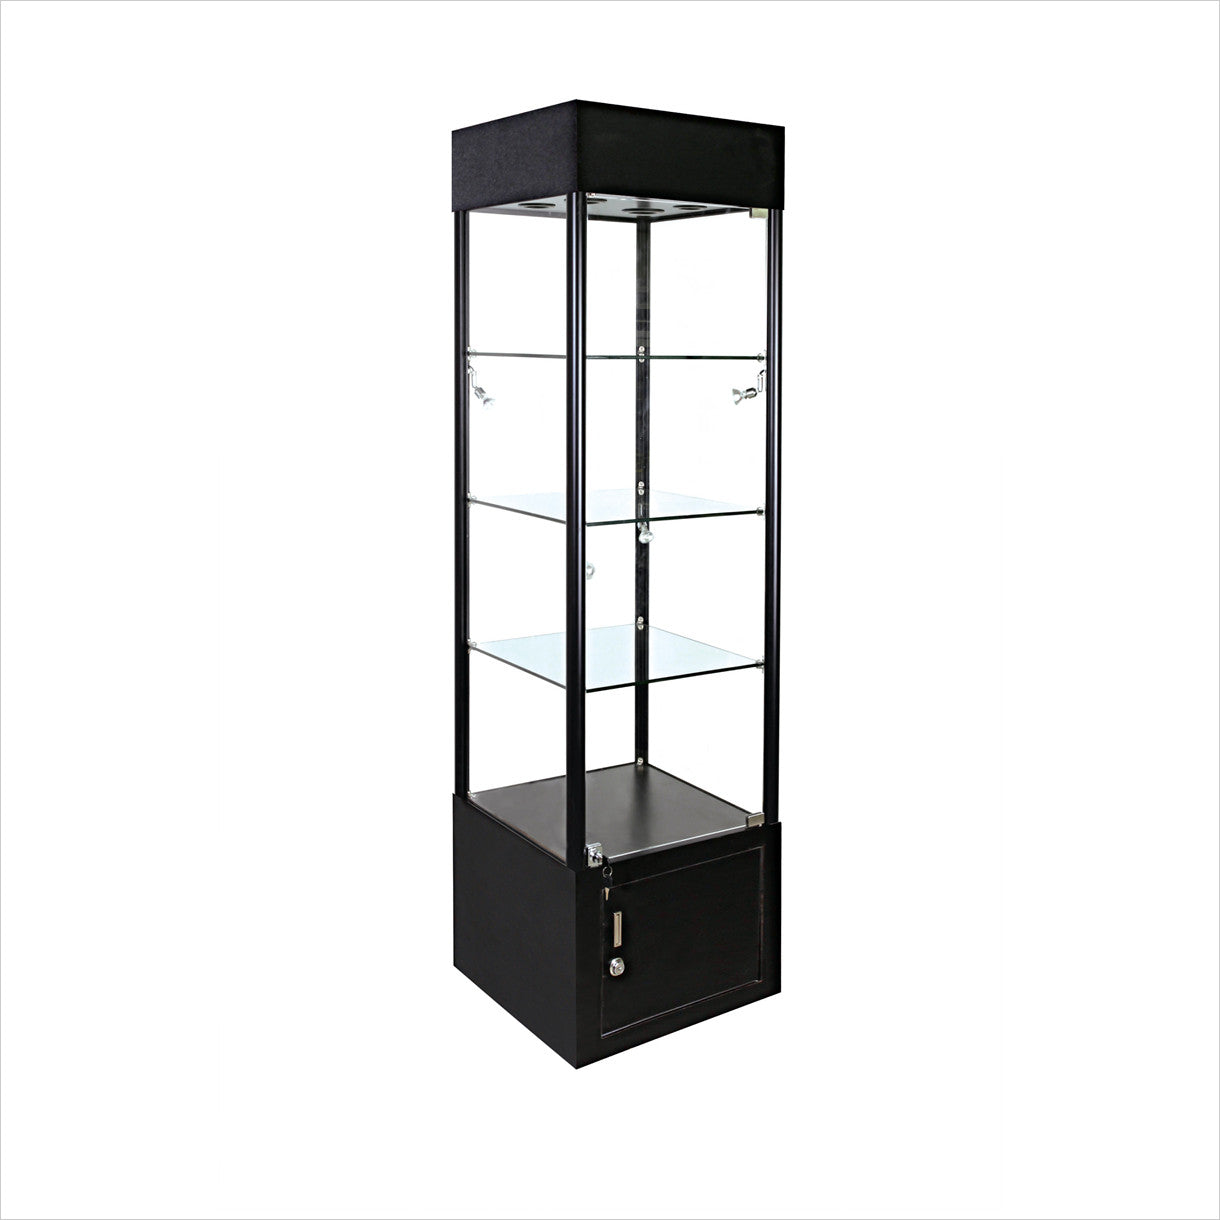 Square glass tower display showcase cabinet with lights